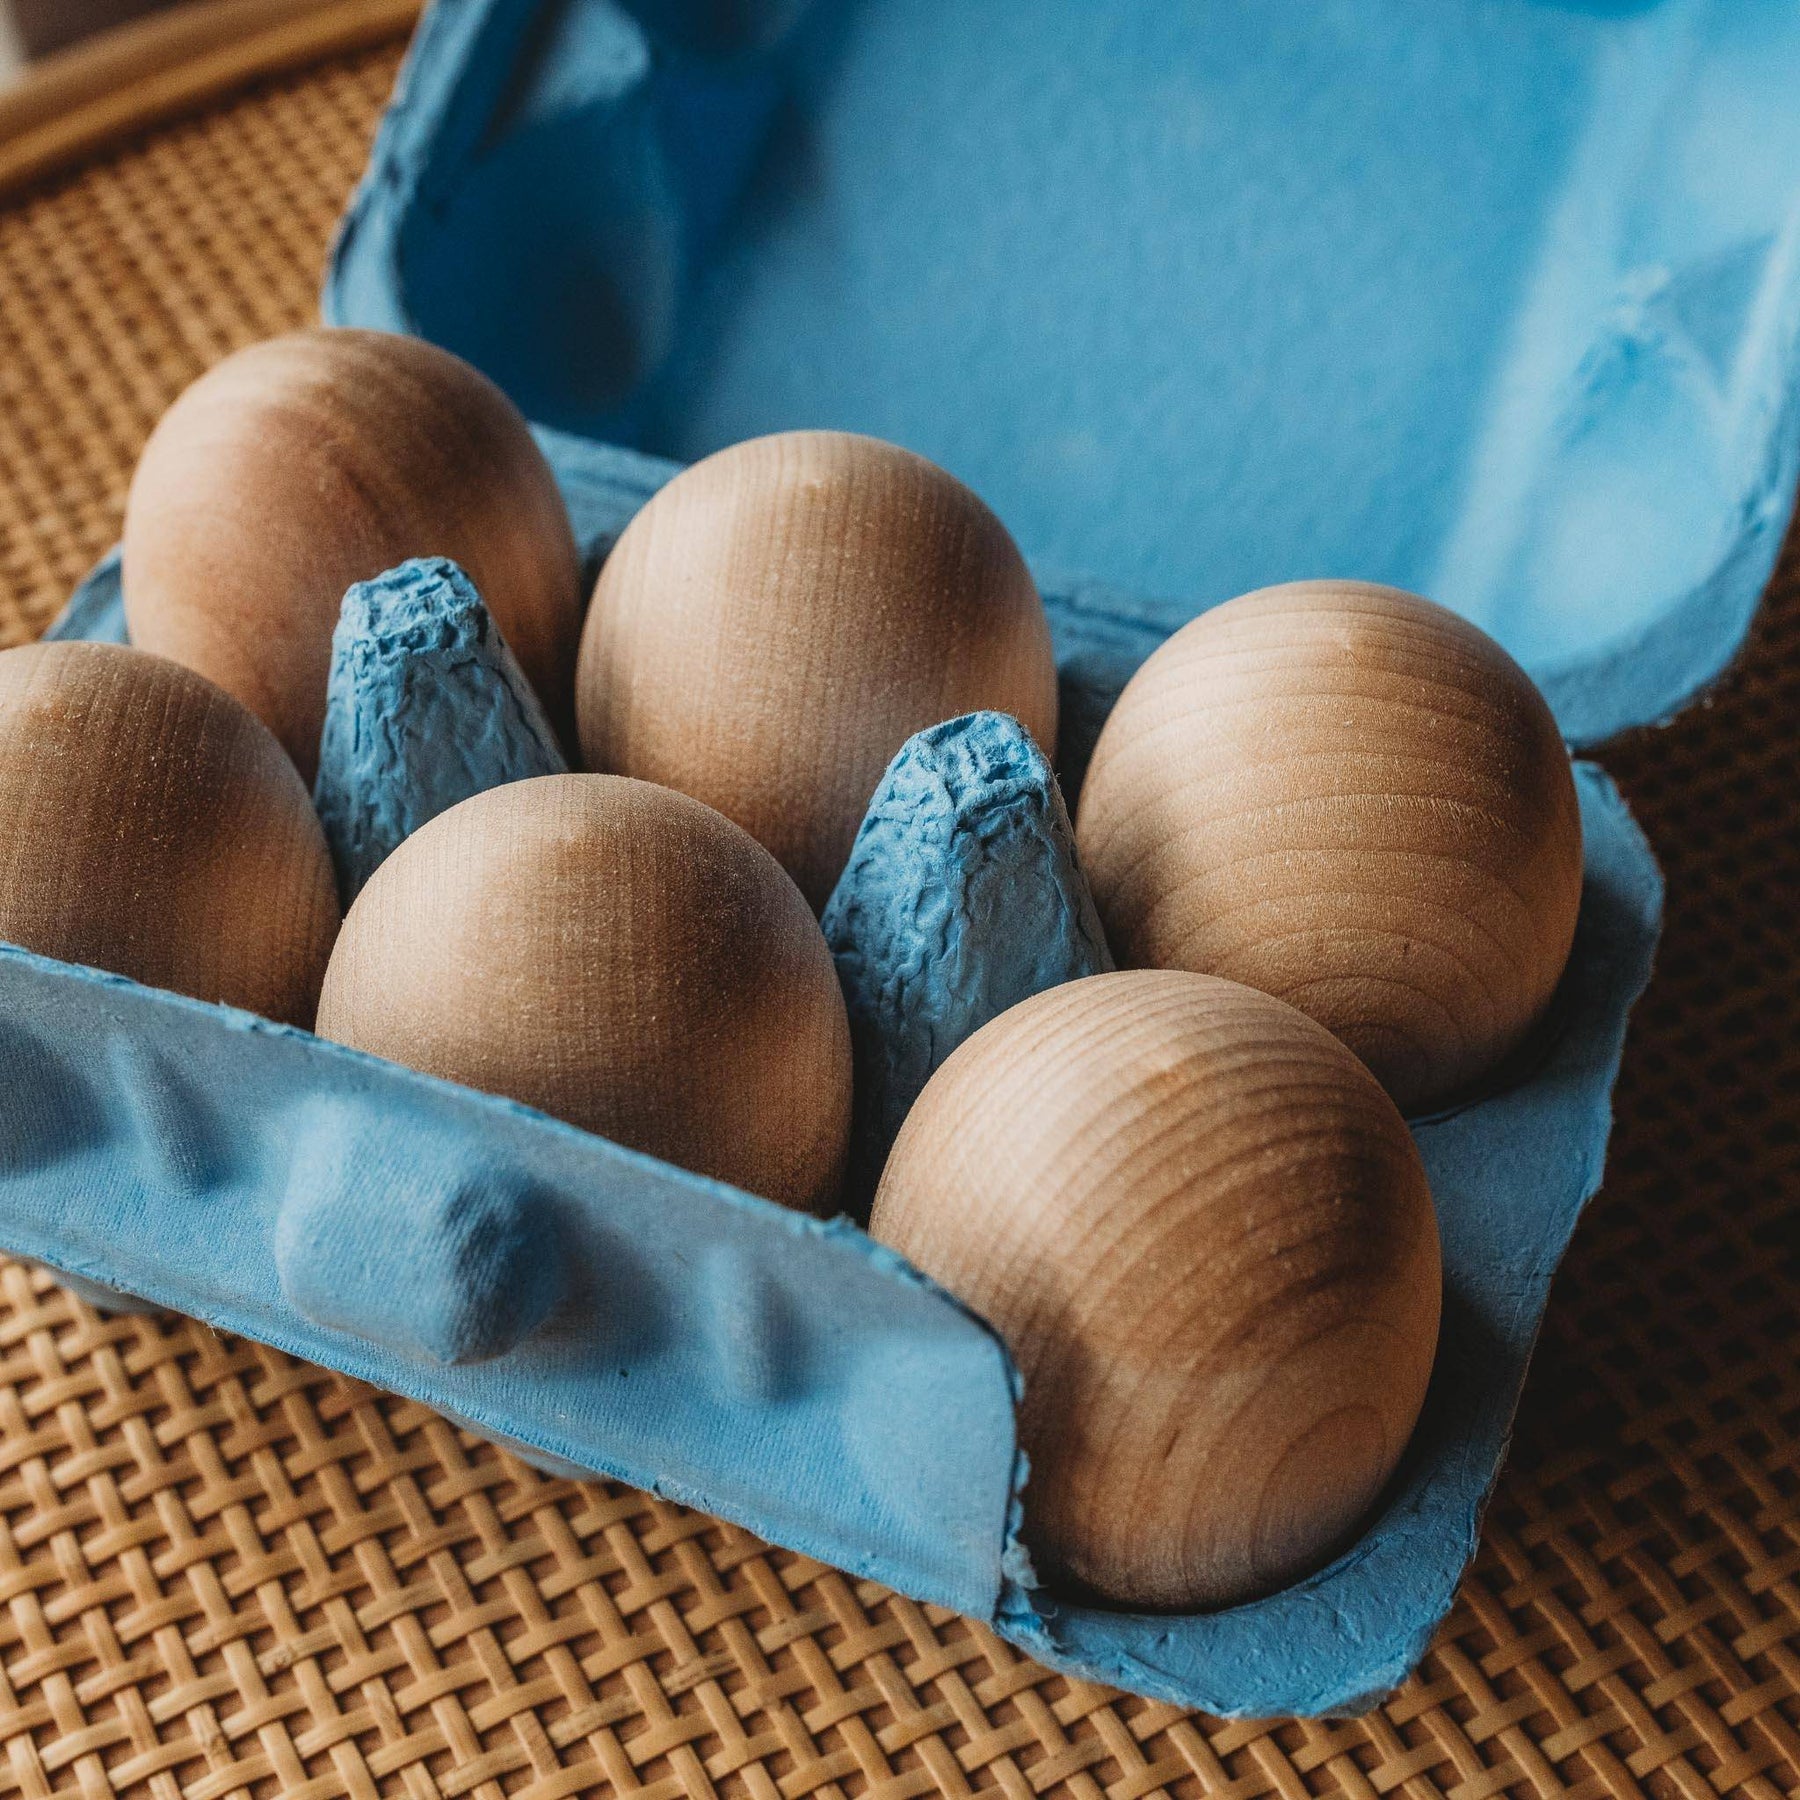 Make Your Own Soy Egg Crayons for Easter – Moon Child Blog – Bella